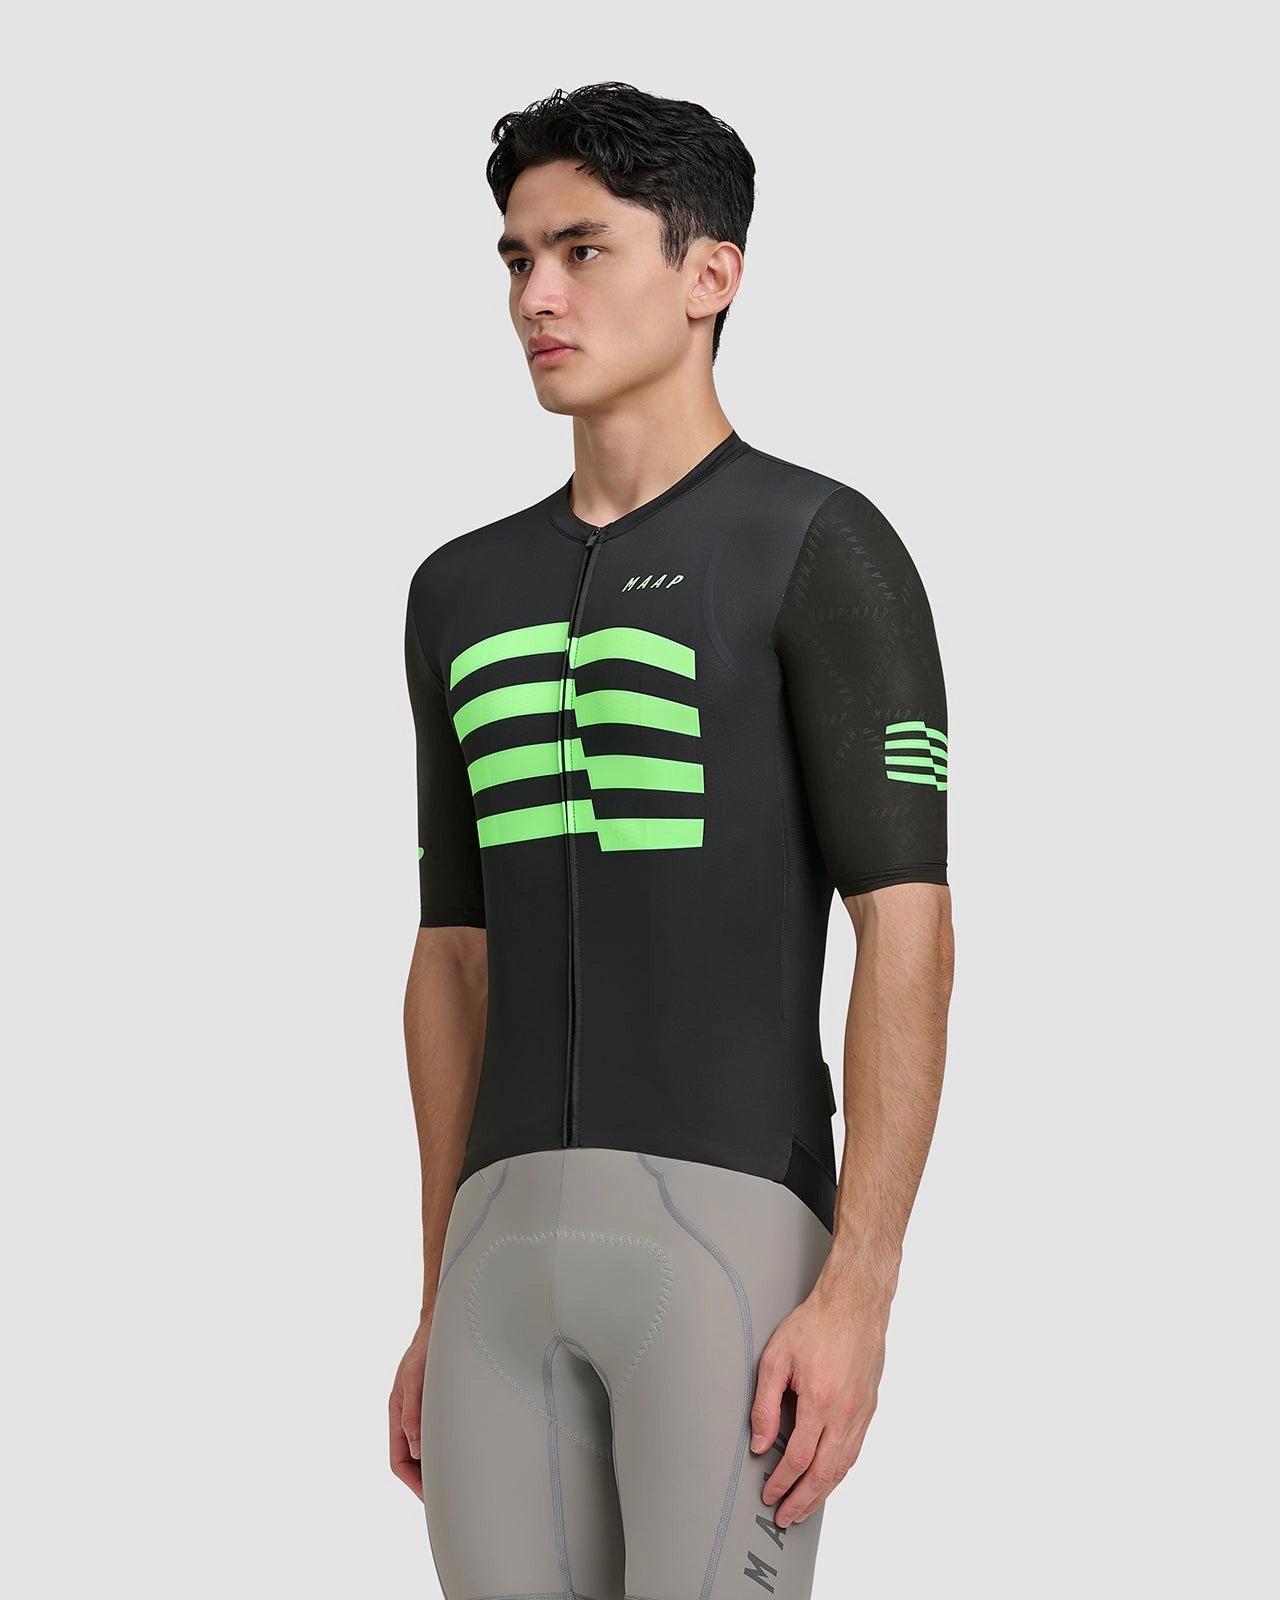 MAAP Maillot Sphere Pro Hex Jersey 2.0